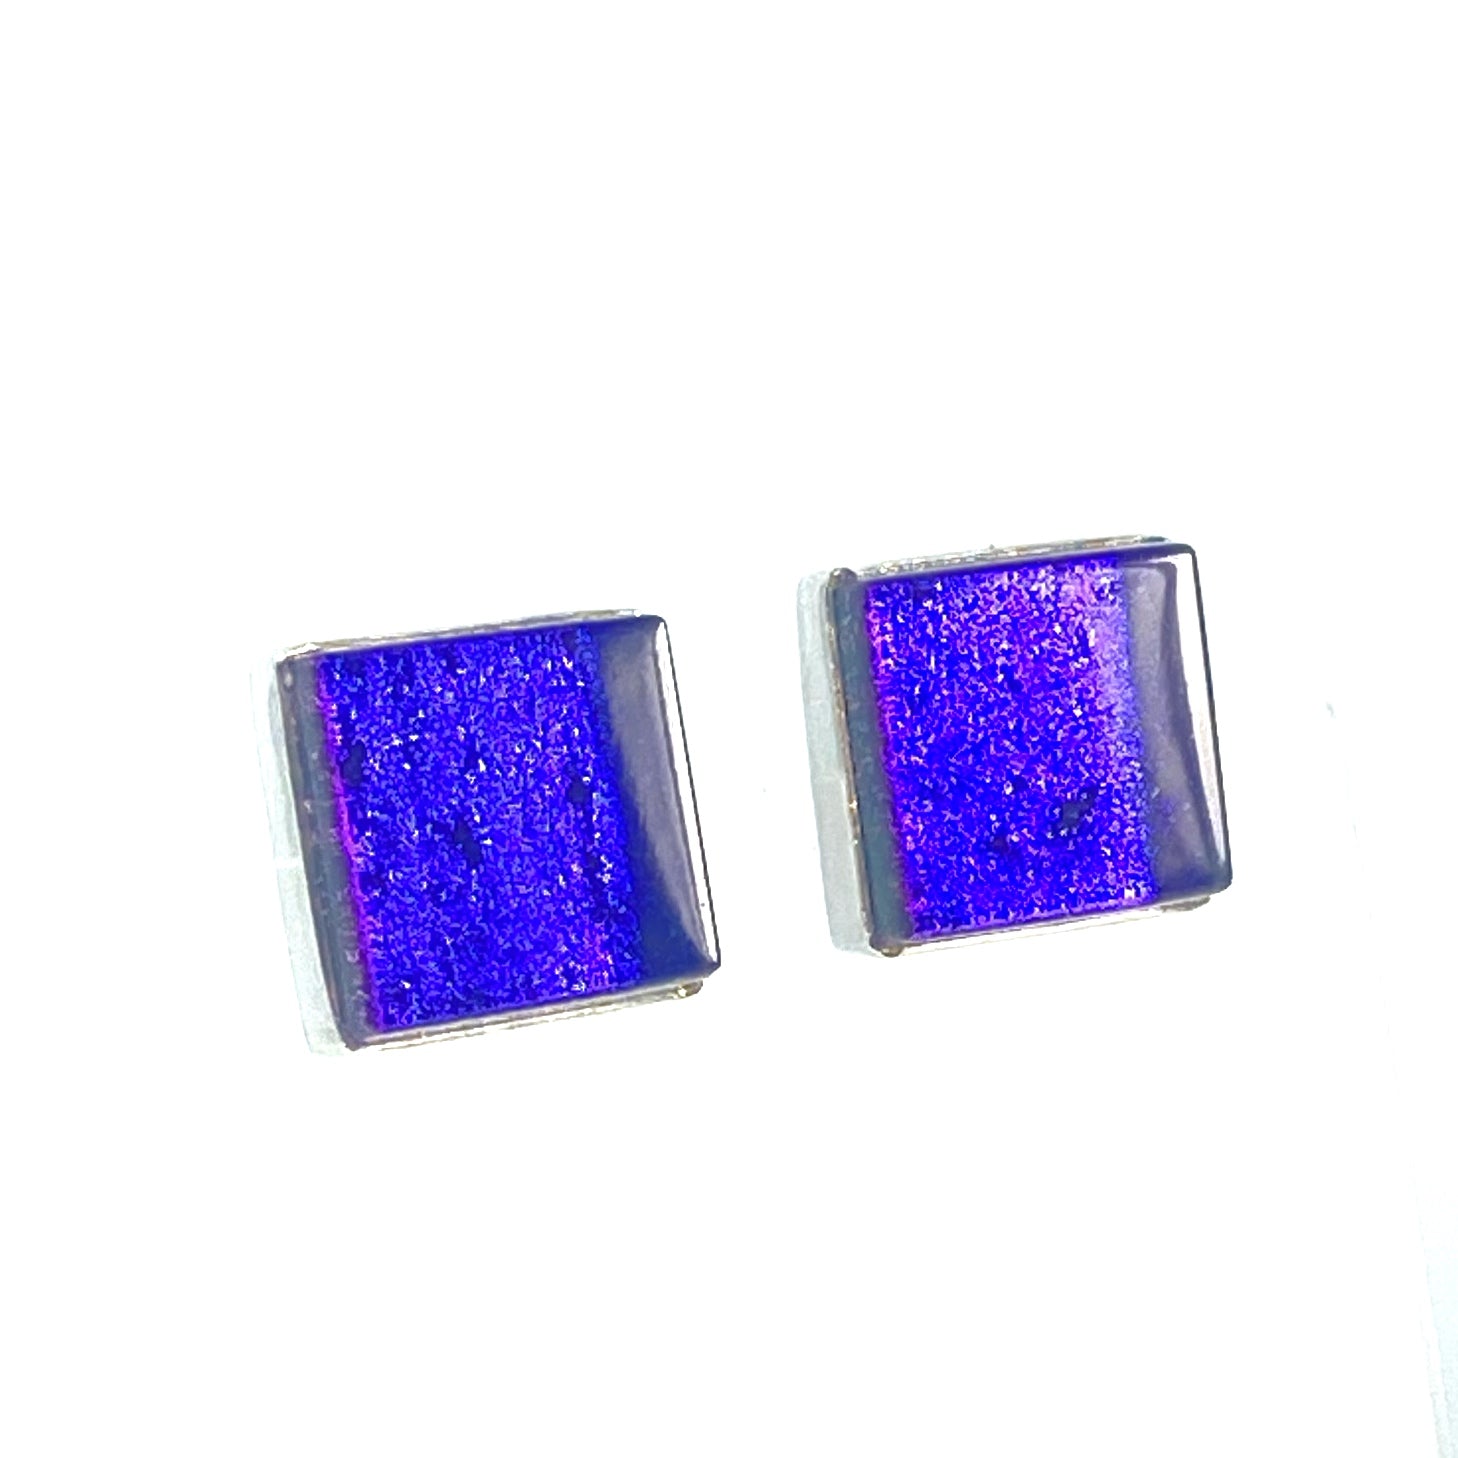 purple, square, post, earrings, fused glass, glass jewelry, glass and silver jewelry, handmade, handcrafted, American Craft, hand fabricated jewelry, hand fabricated jewellery,  Athen, Georgia, colorful jewelry, sparkle, bullseye glass, dichroic glass 